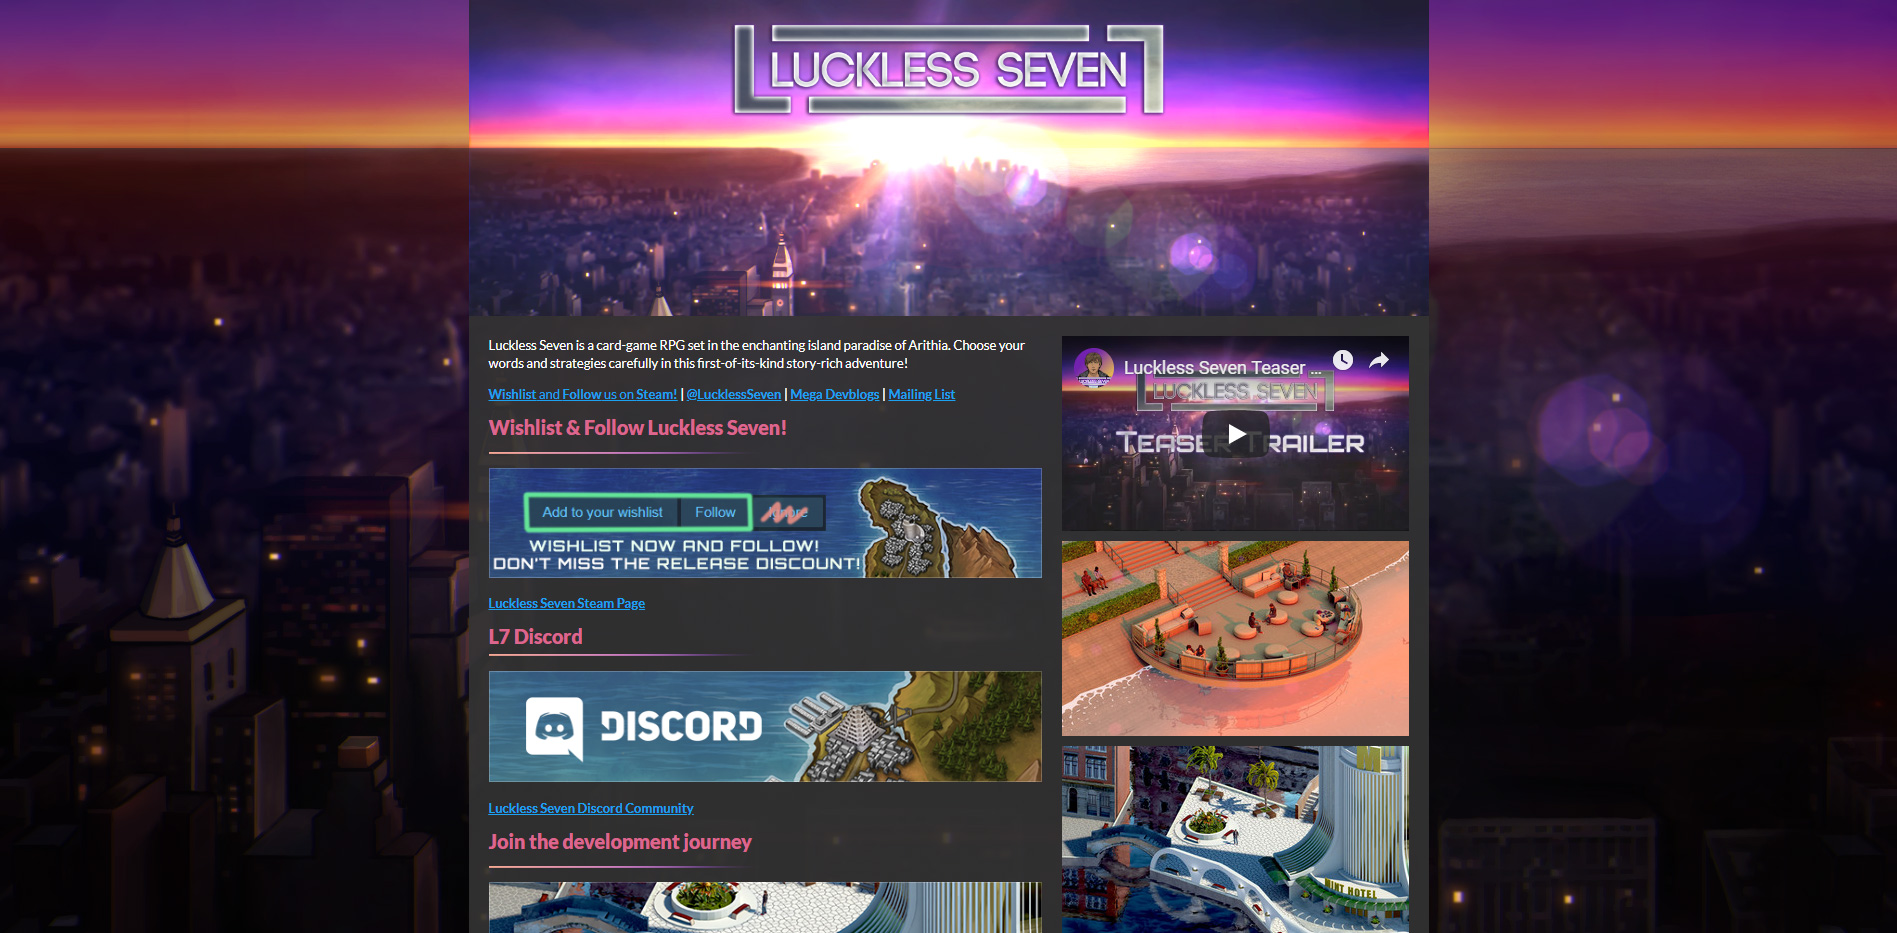 Luckless Seven itchio launch mar